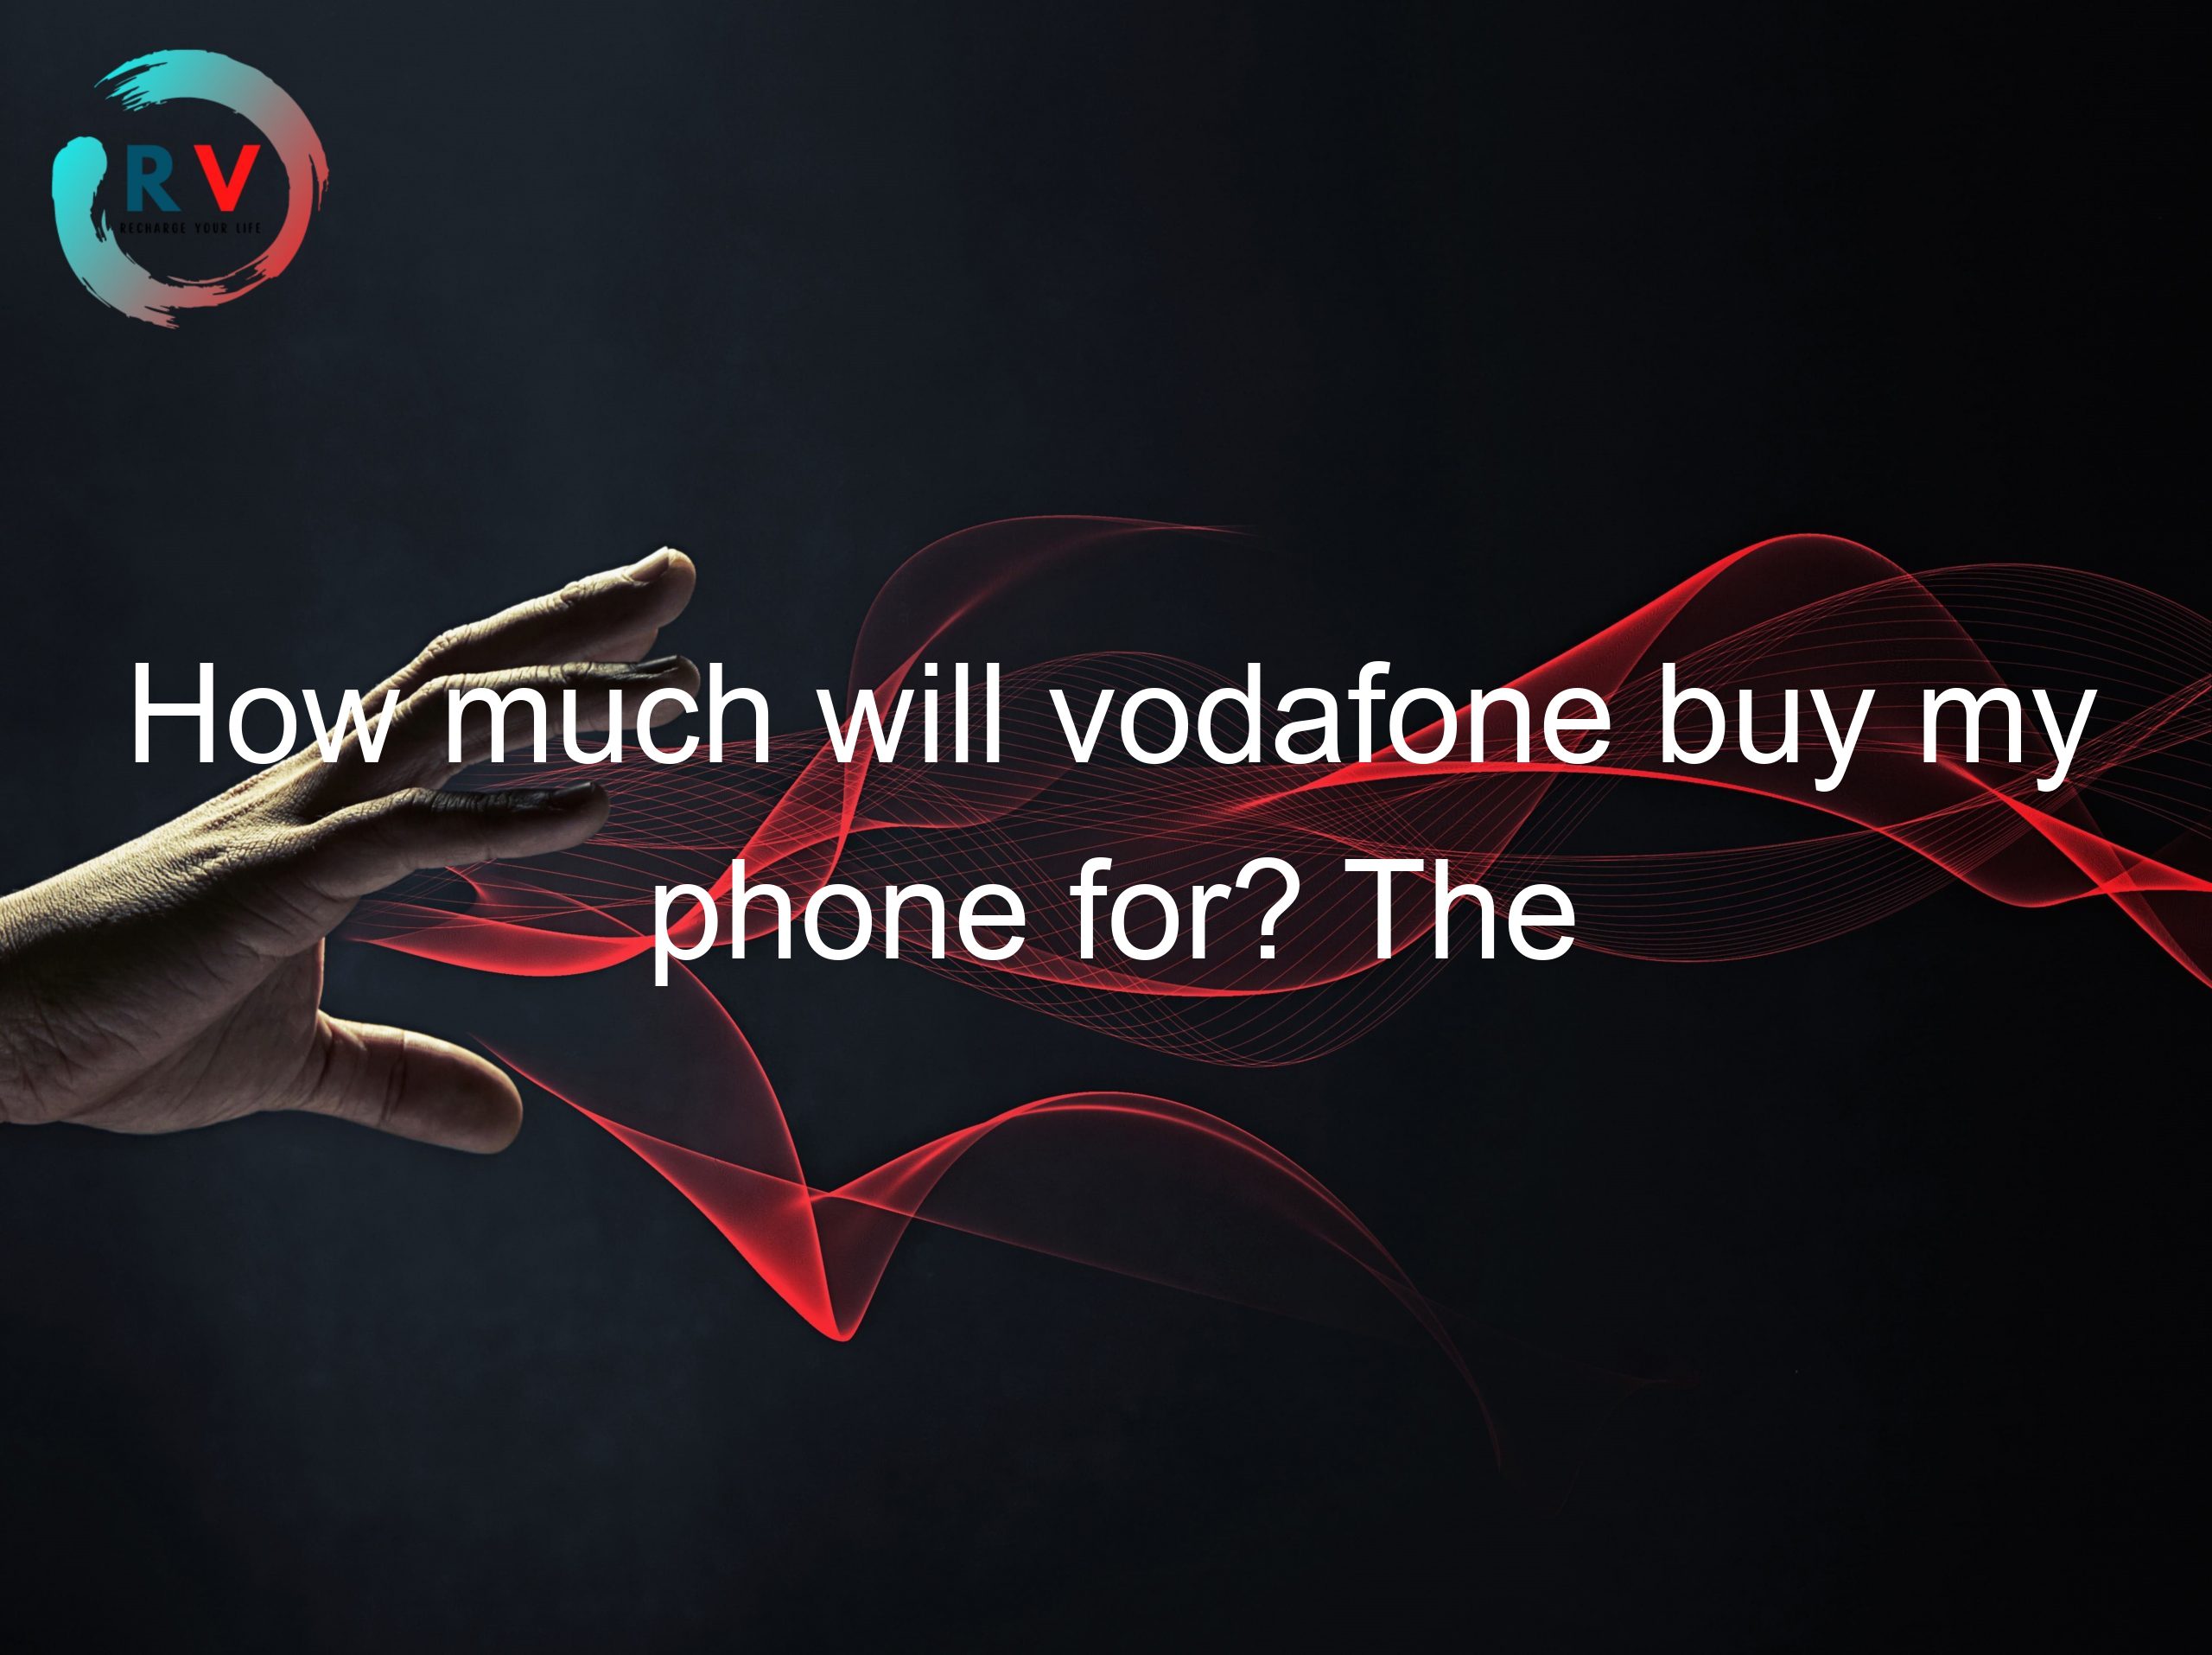 How much will vodafone buy my phone for? The answer may surprise you!